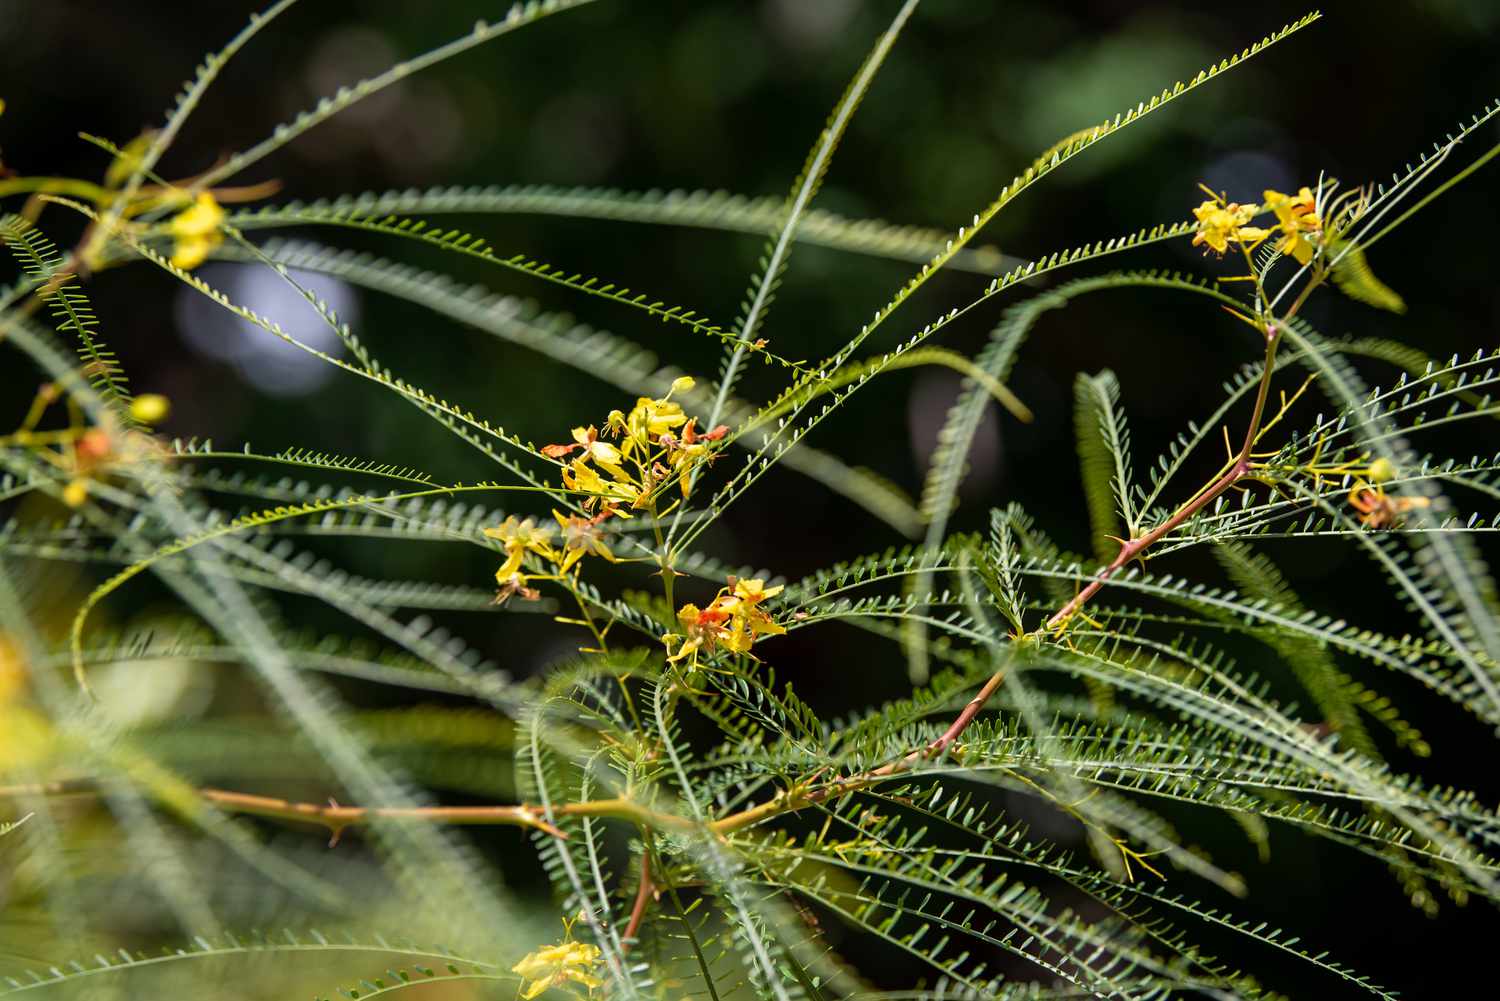 Palo verde tree with thin feather-like branches and small yellow flowers closeup